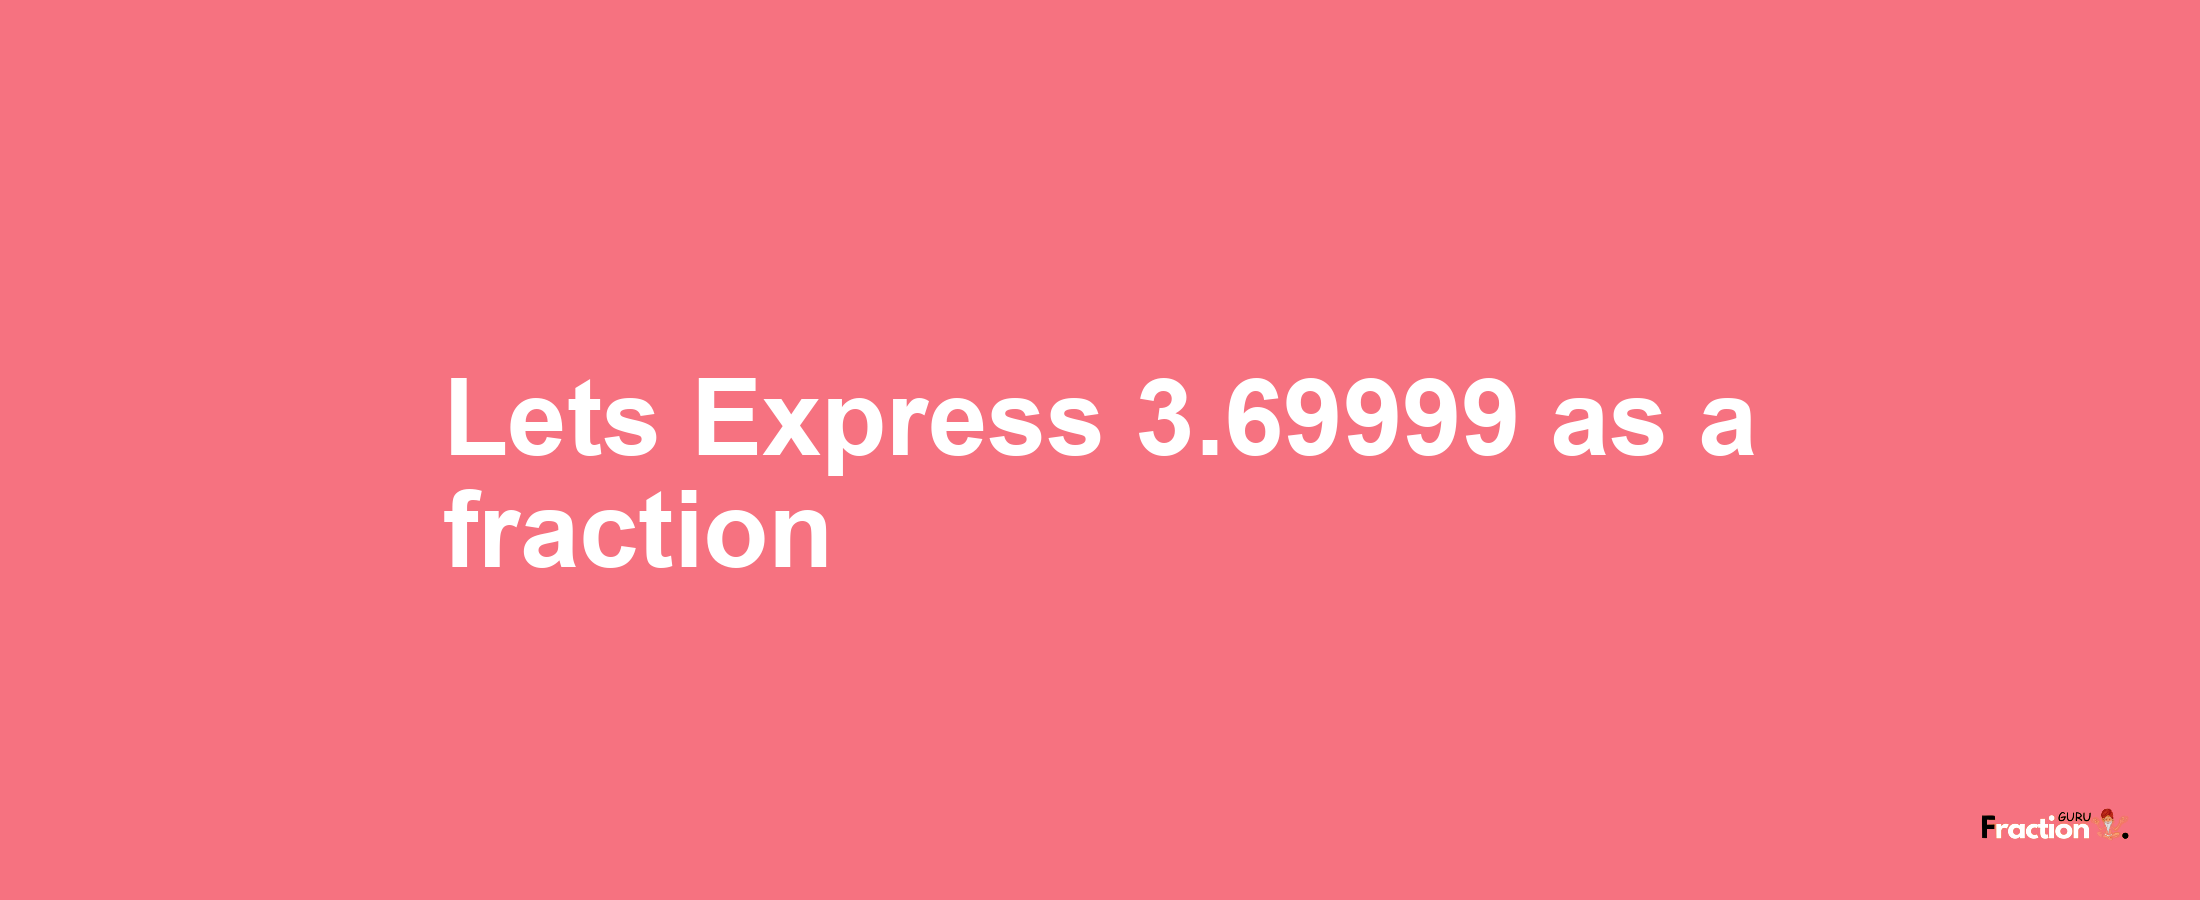 Lets Express 3.69999 as afraction